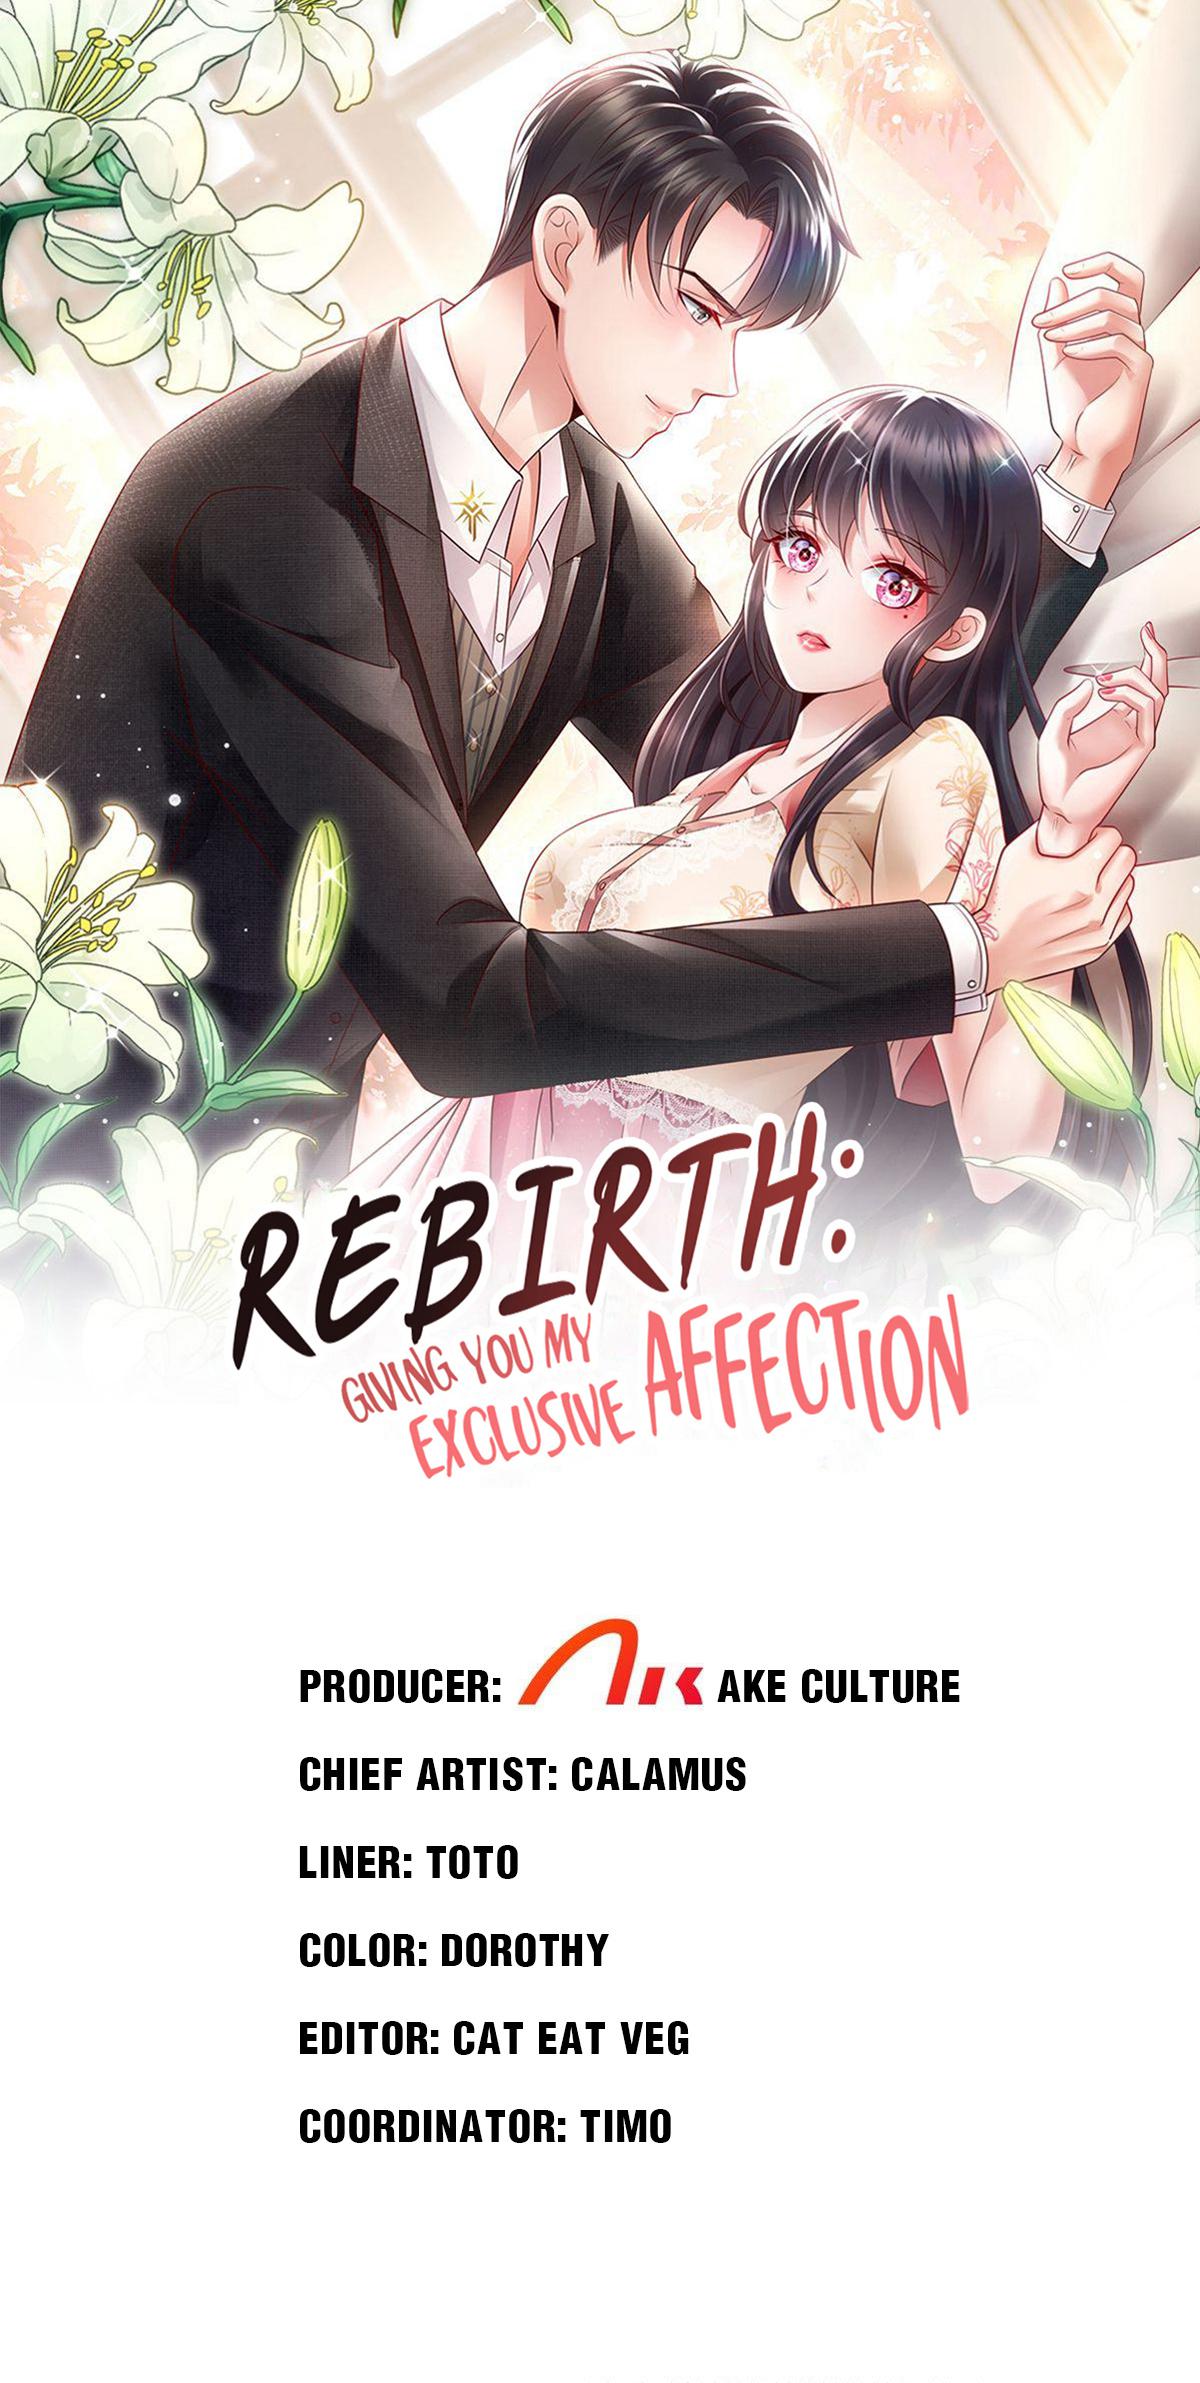 Rebirth: Giving You My Exclusive Affection 226